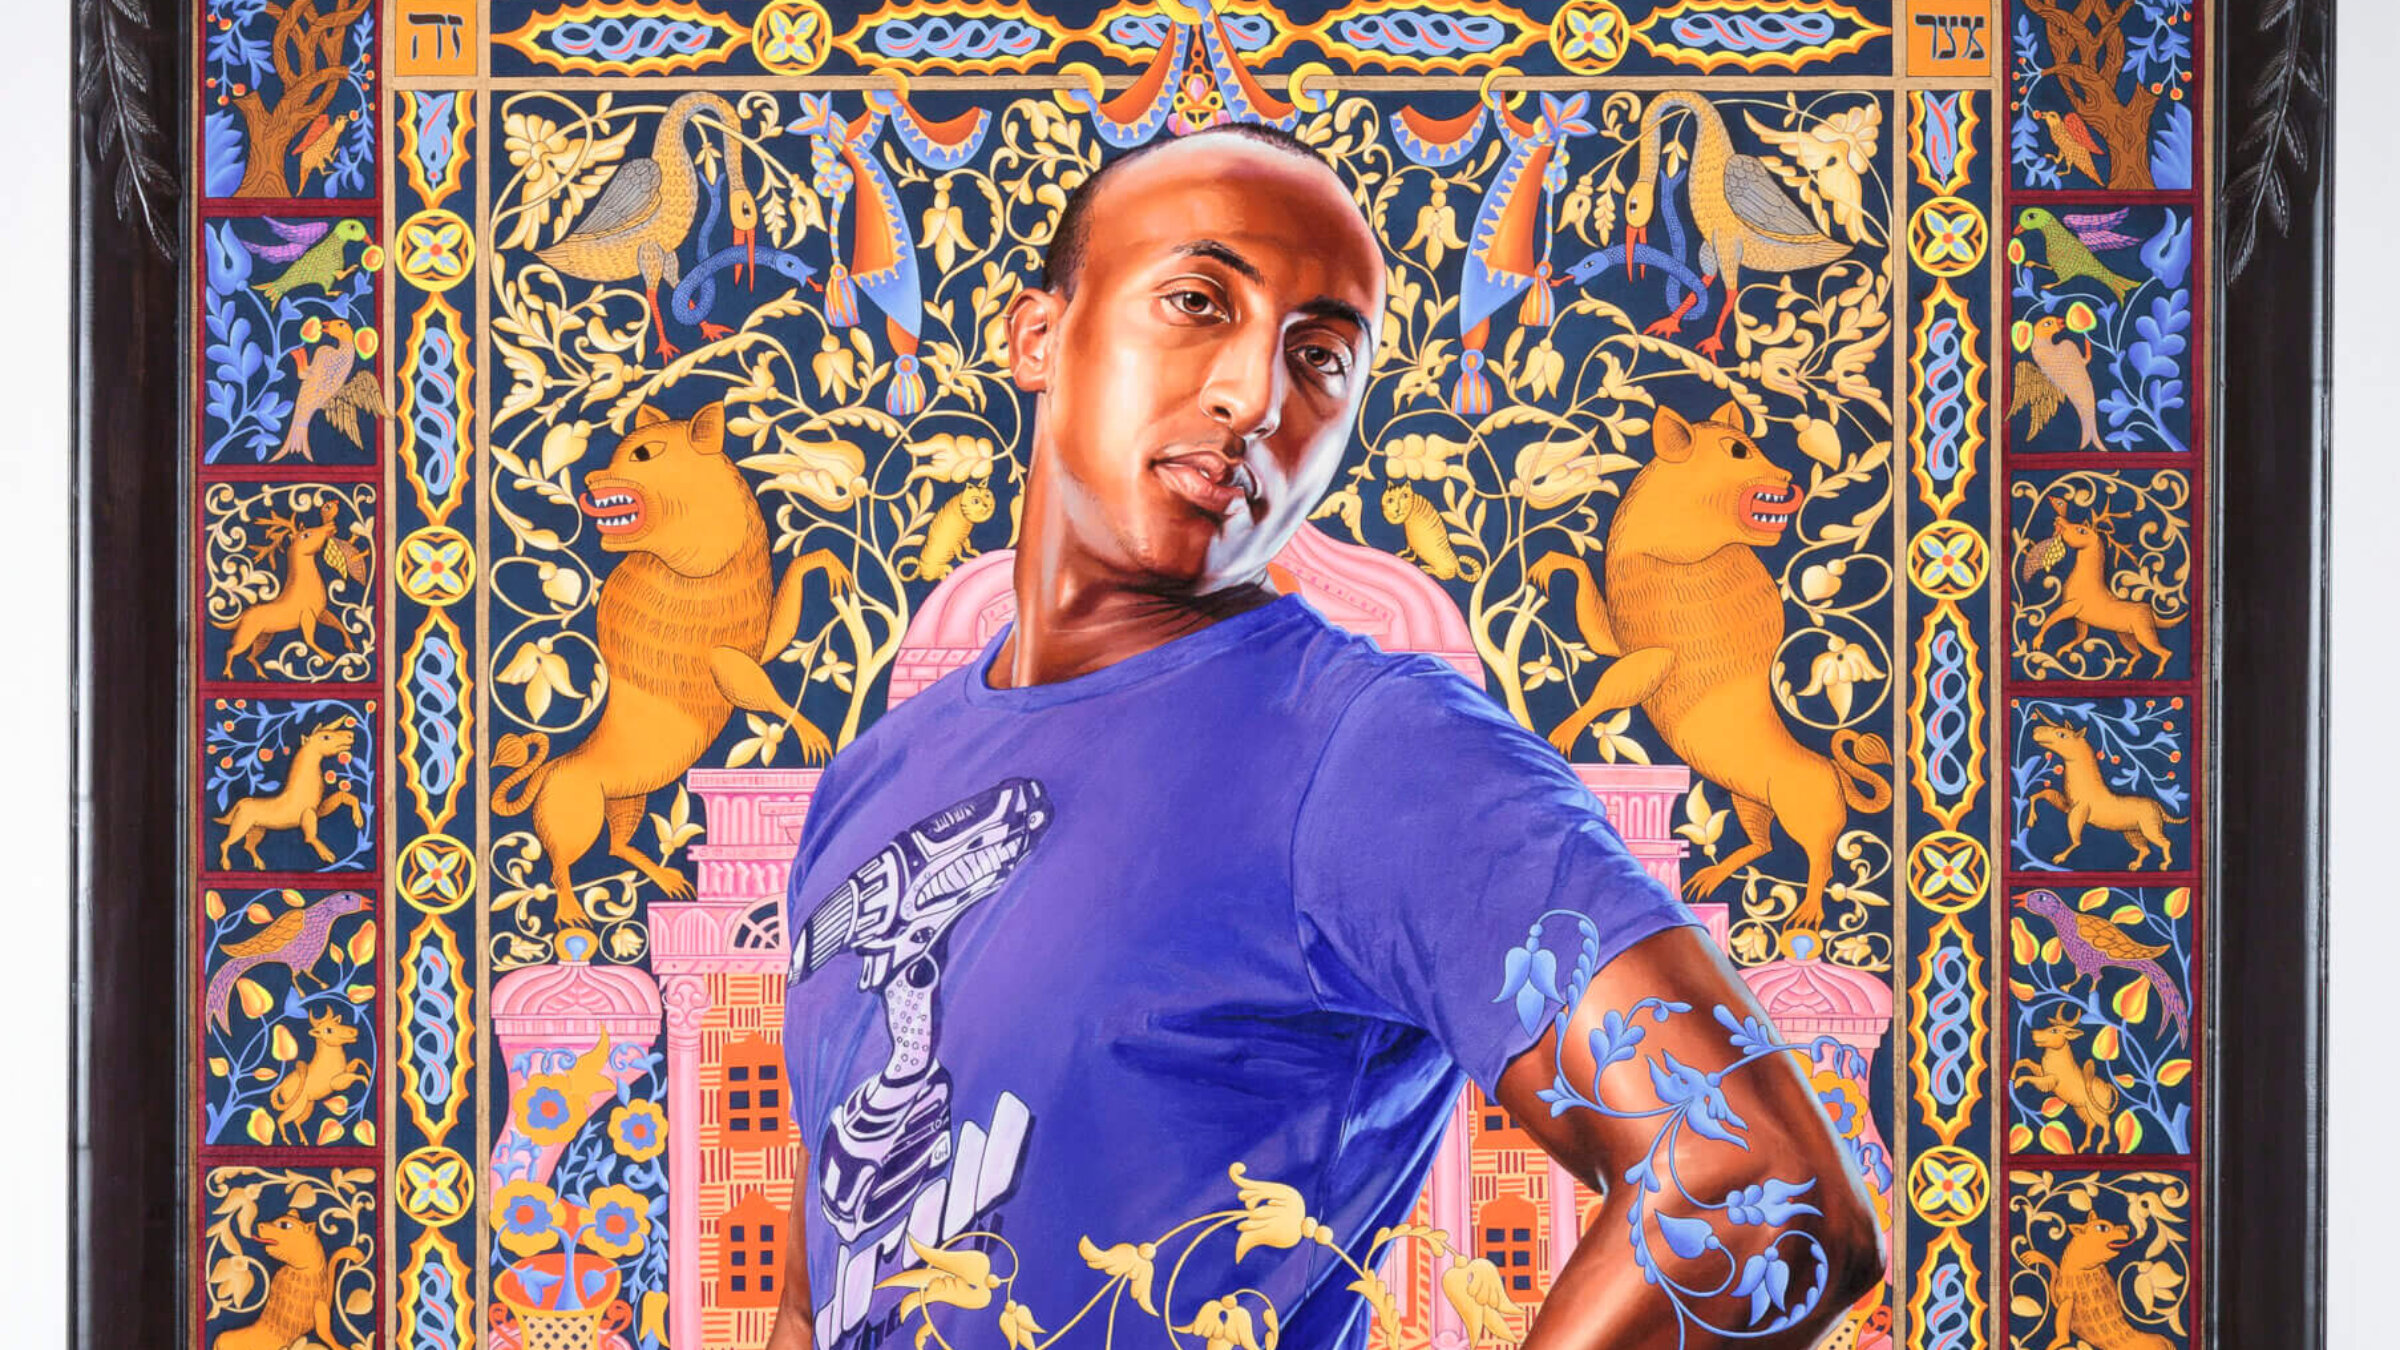 Kehinde Wiley's portrait depicts  Alios Itzhak, a young Jewish Israeli man of Ethiopian descent.